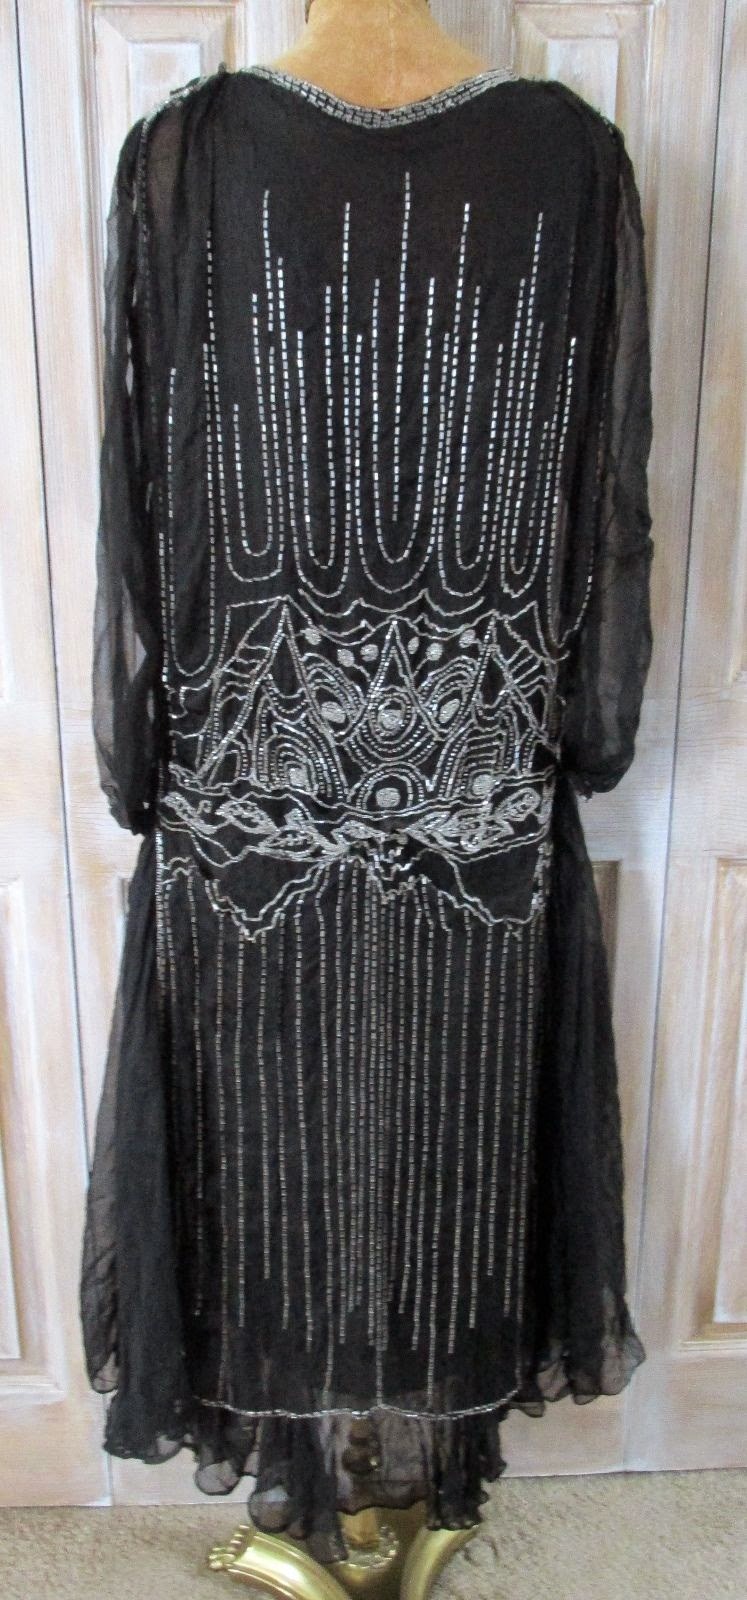 All The Pretty Dresses 1920's Dress with Long Sleeves!